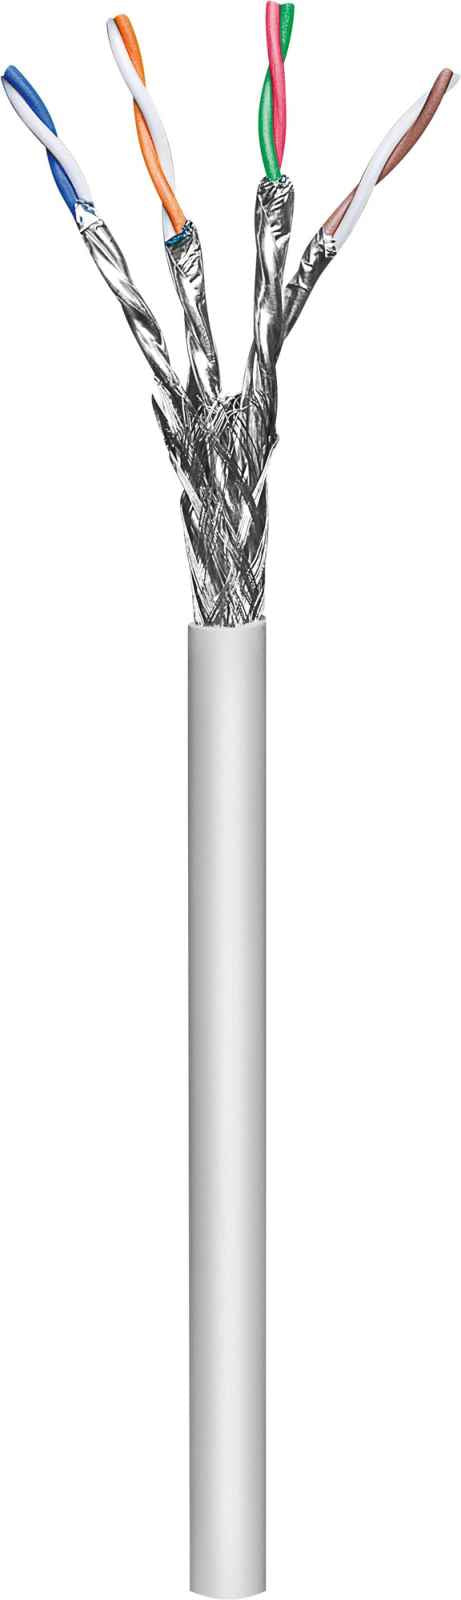 Intellinet Network Bulk Cat6a Cable, 23 AWG, Solid Wire, Grey, 305m, S/FTP, LSZH, CPR-Dca Rated, Drum